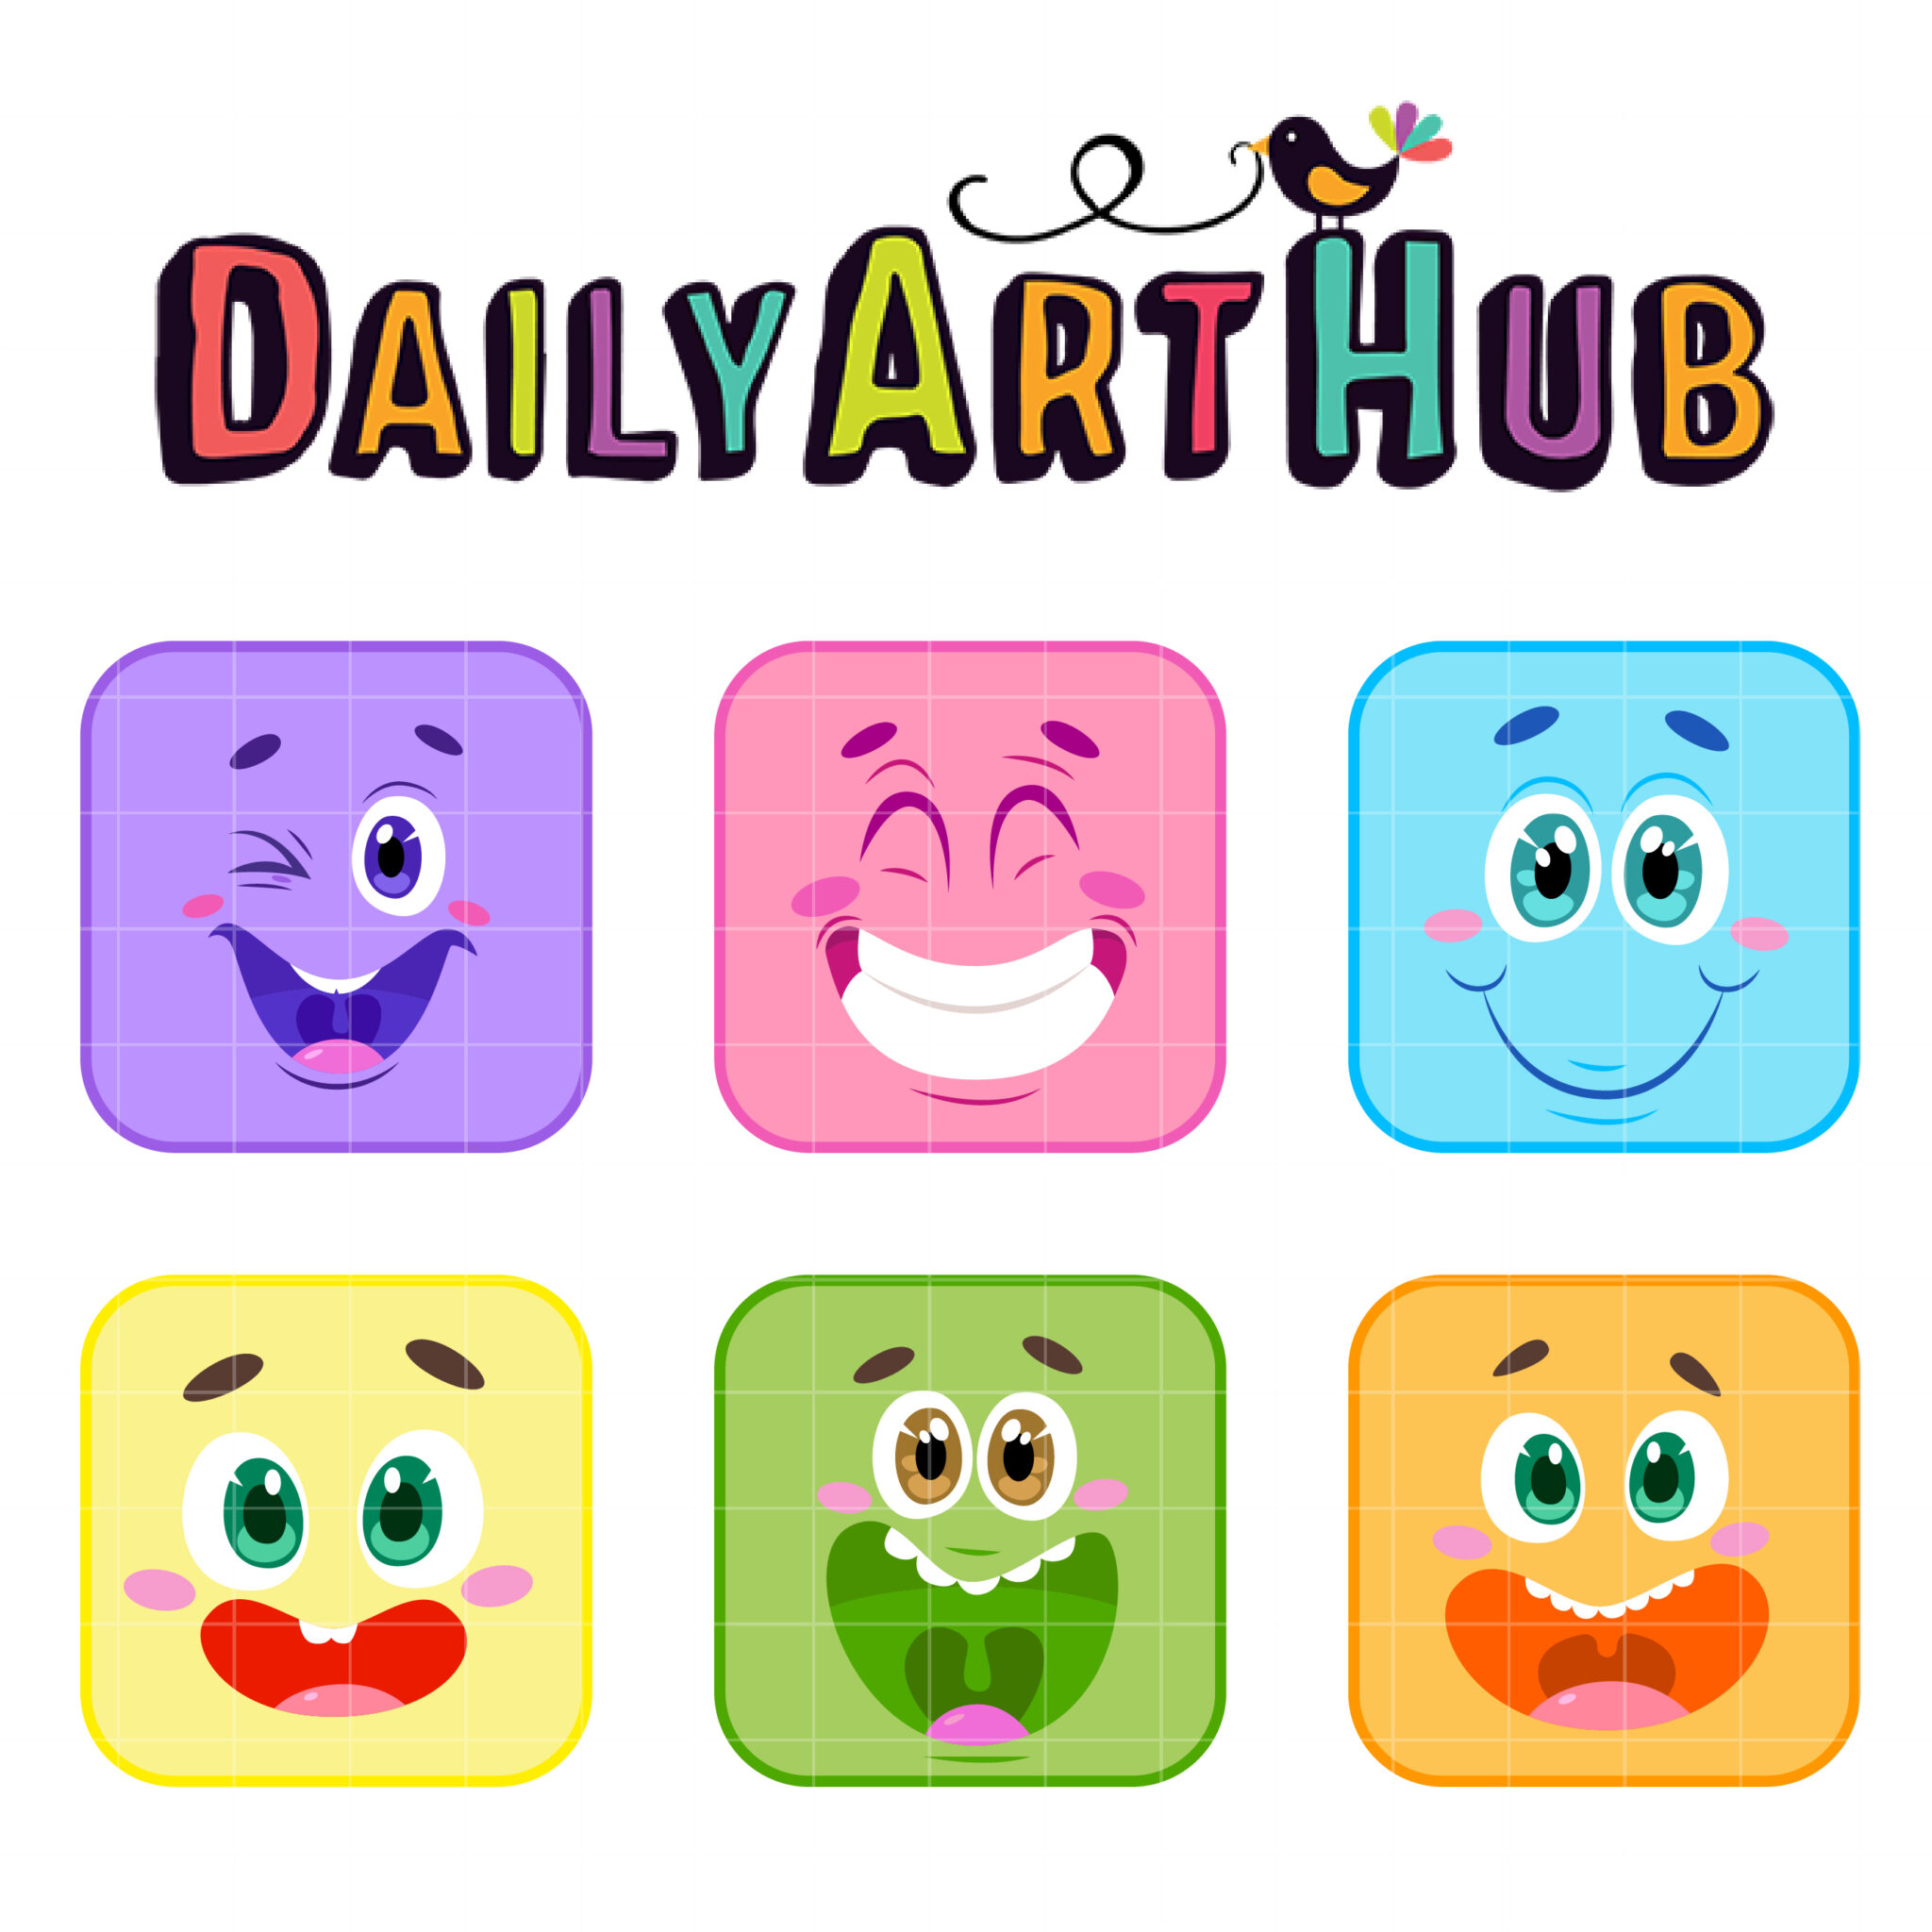 https://www.dailyarthub.com/wp-content/uploads/2021/12/Square-Smiley-Faces-scaled.jpg